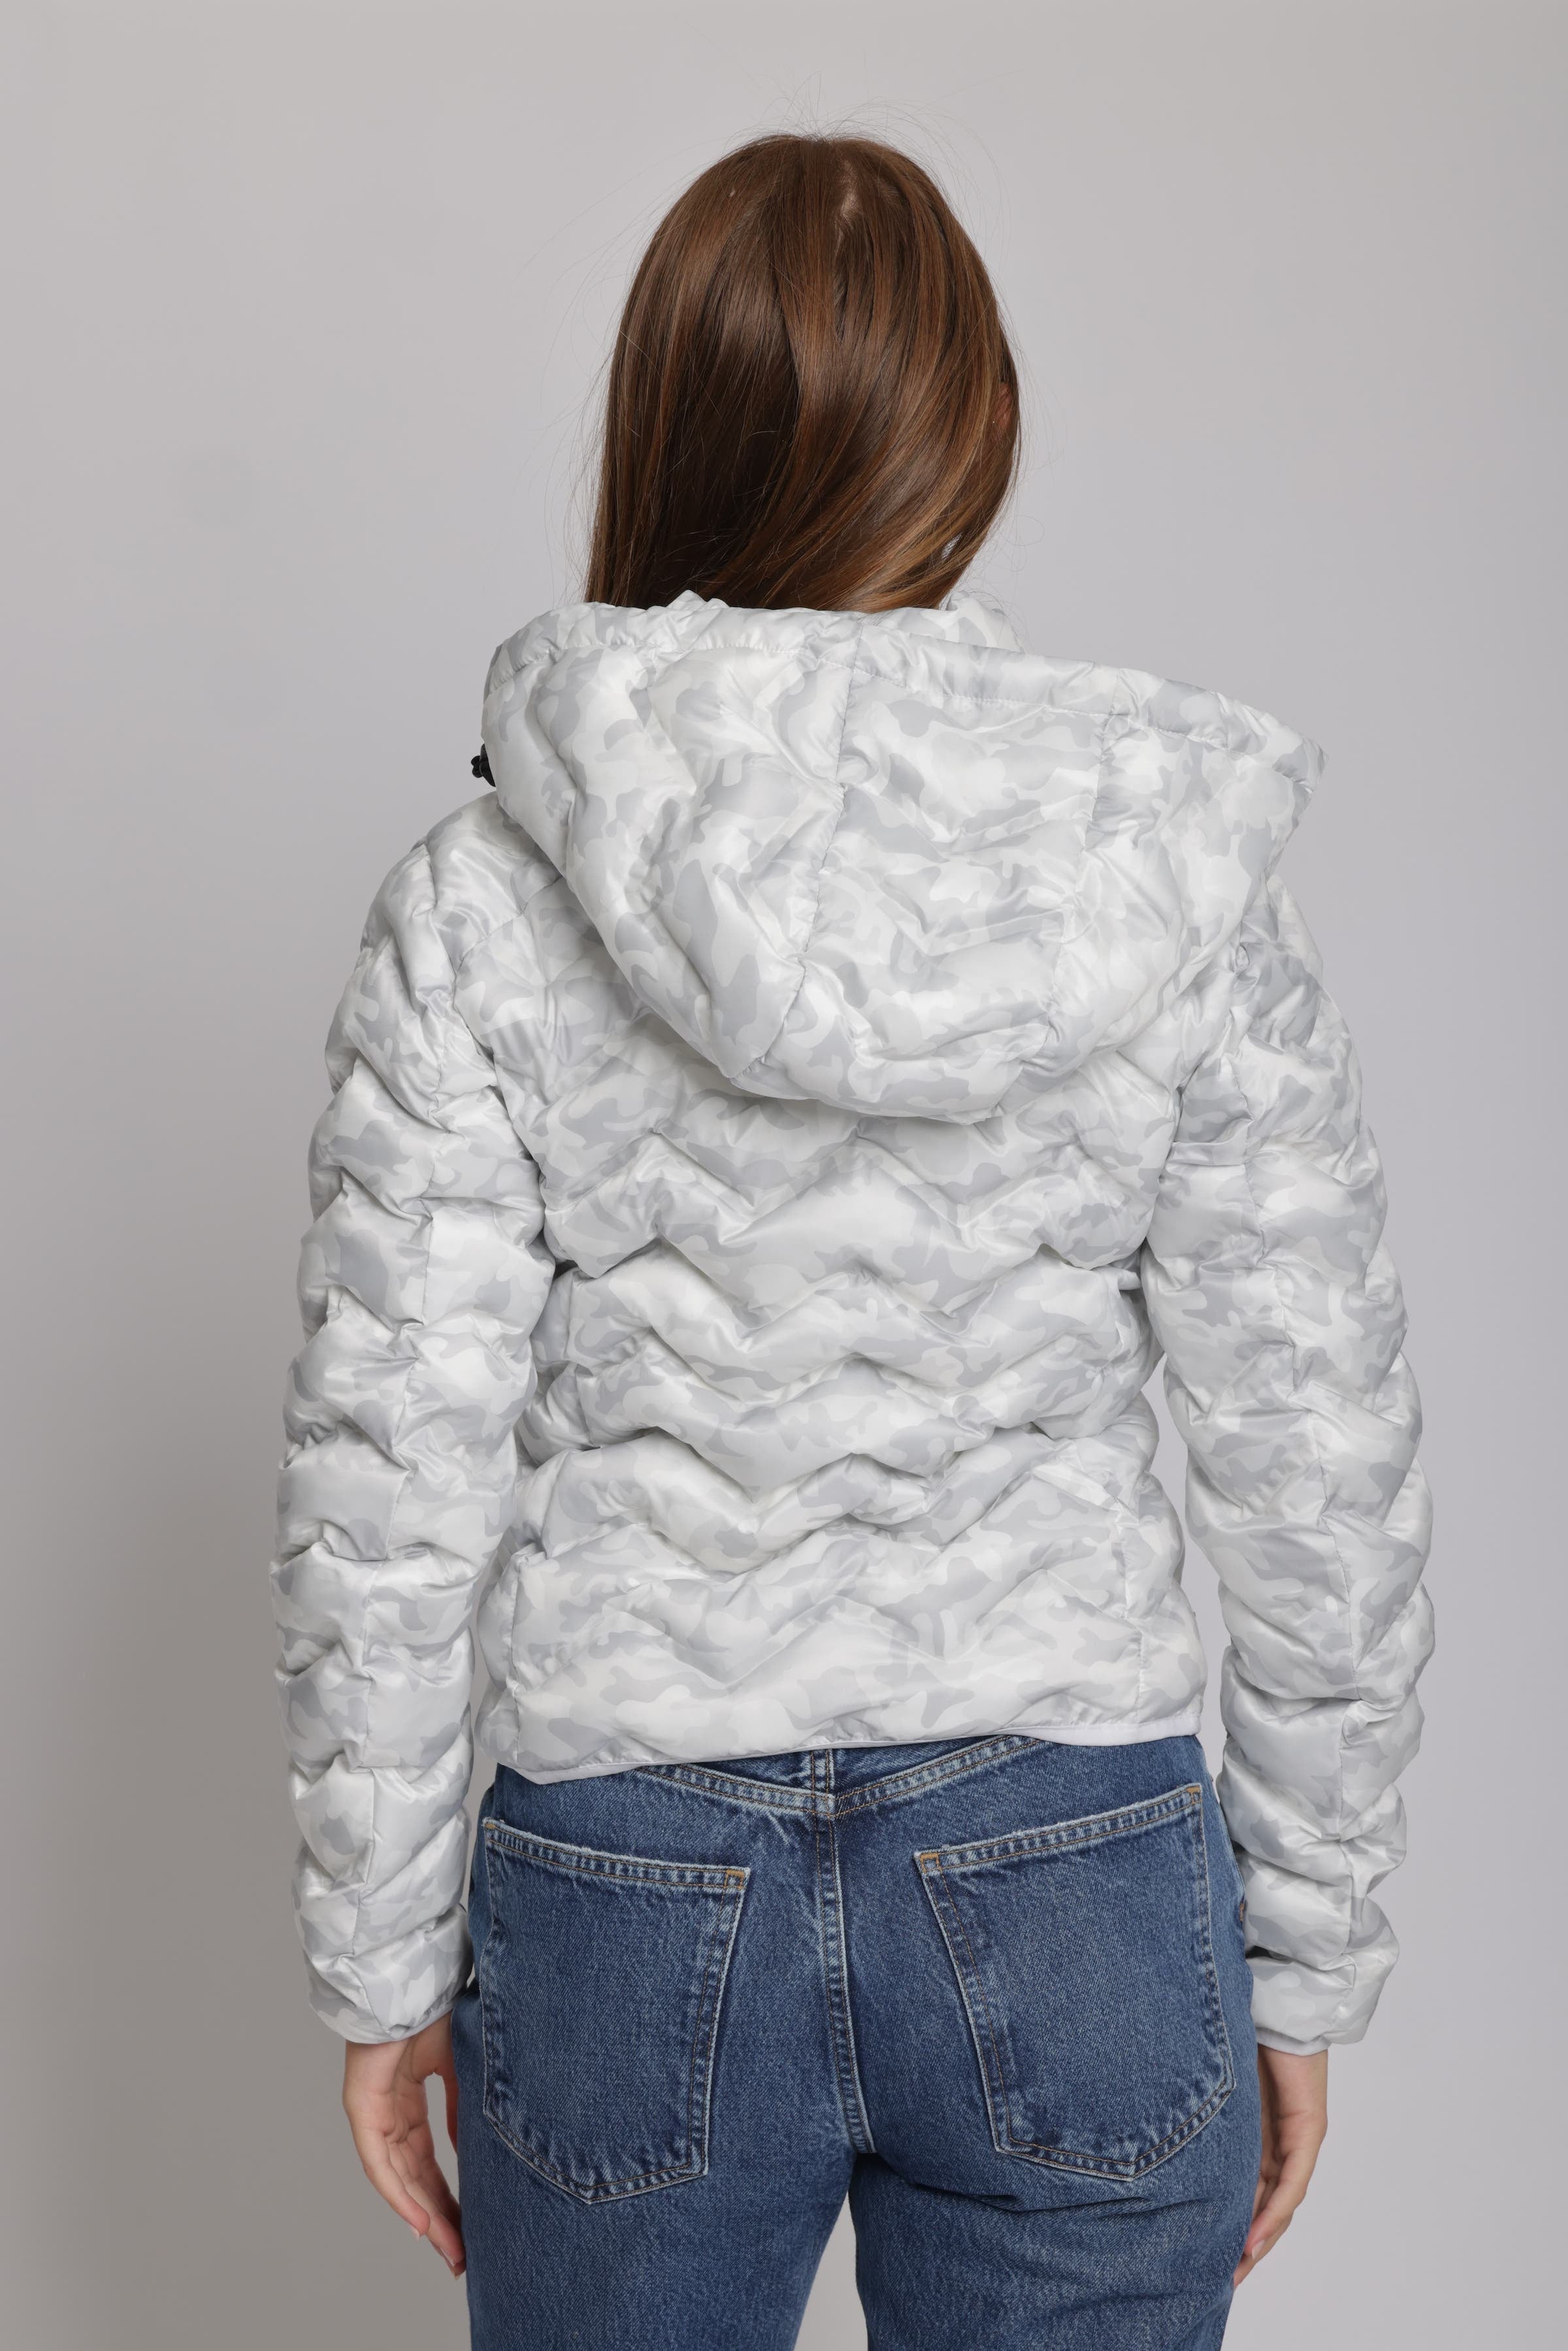 Women's packable puffer jacket - O8Lifestyle